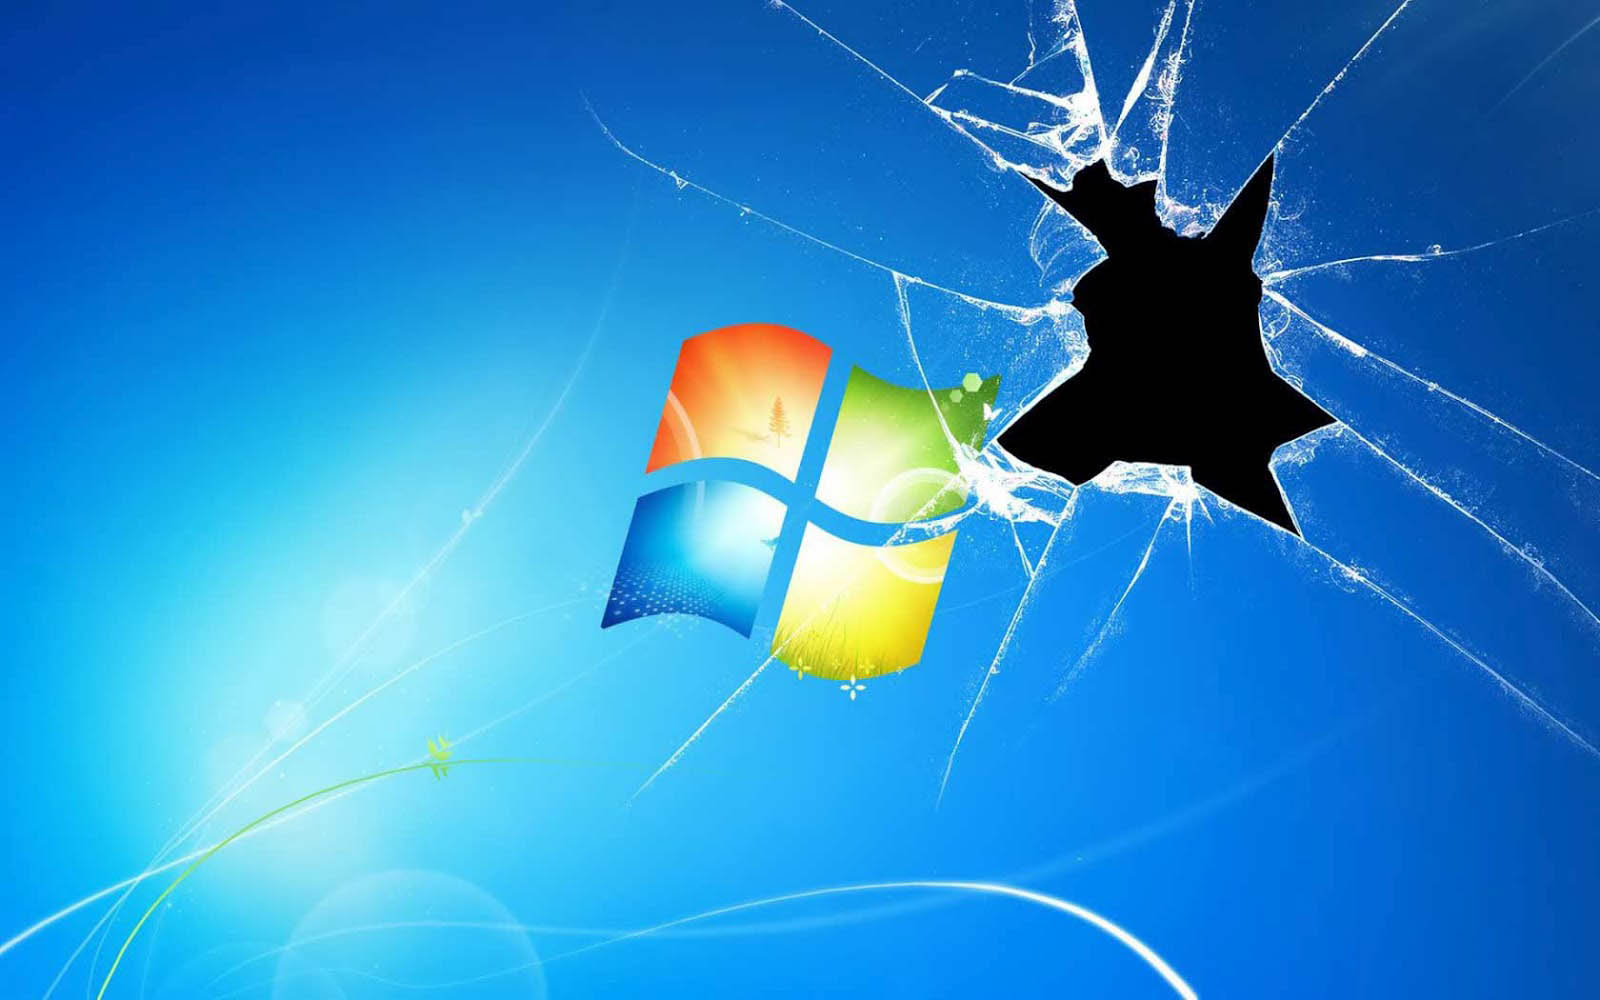 Windows Broken Glass Wallpaper Image Photos Pictures And Background